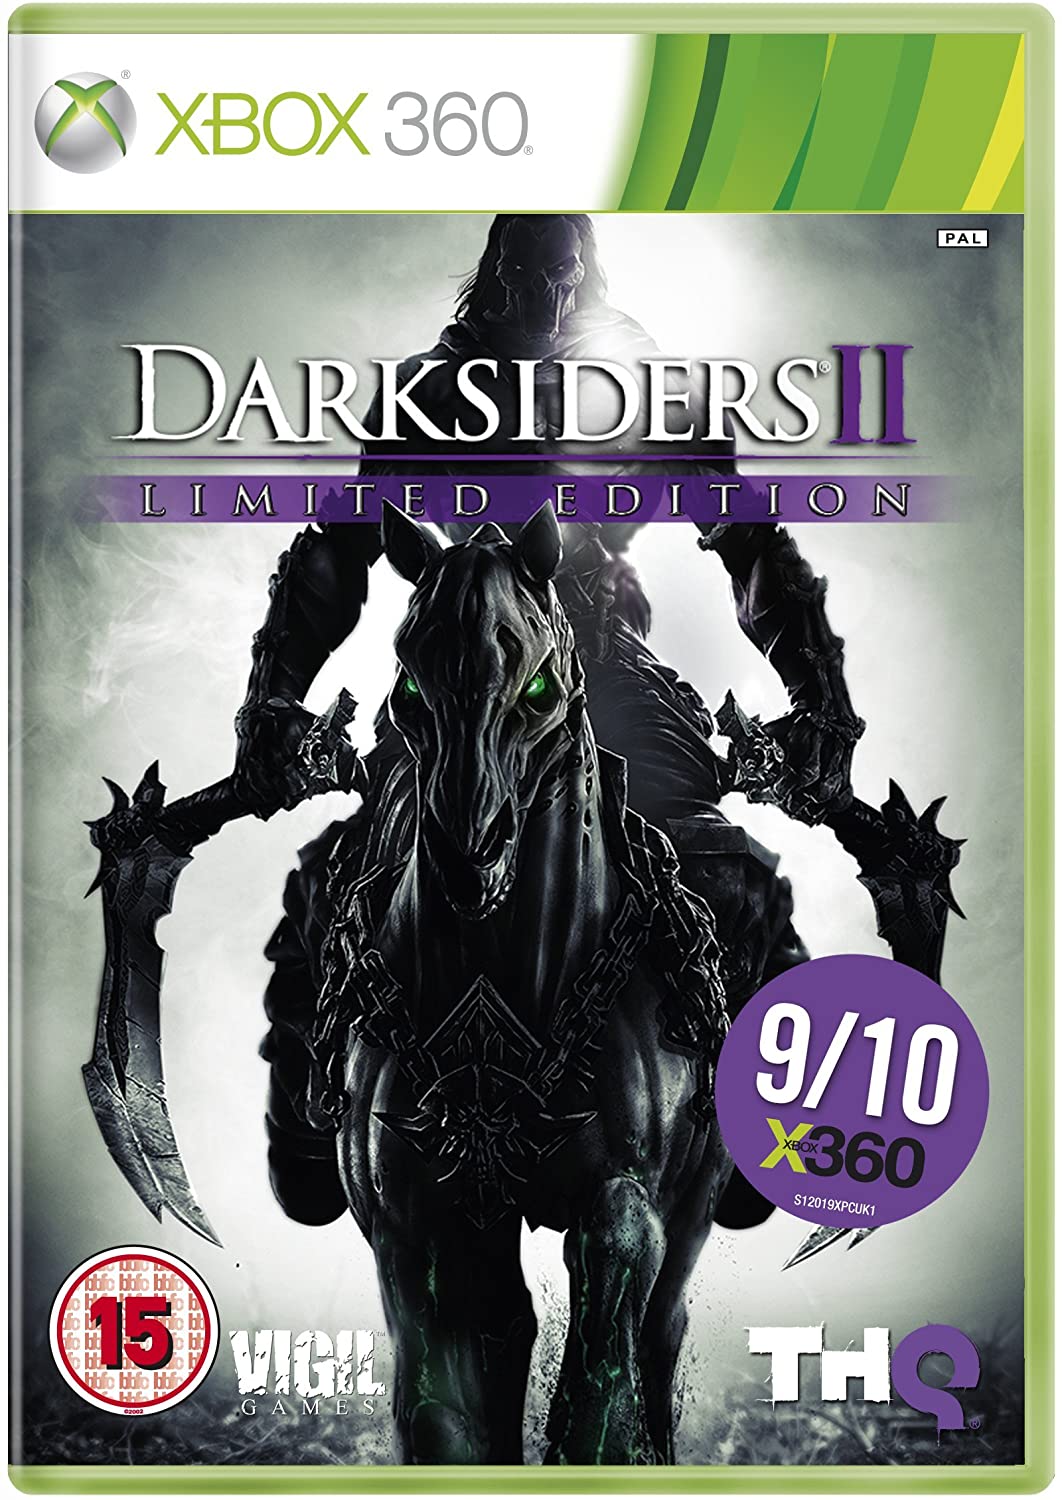 Darksiders II - Limited Edition - Includes Argul's Tomb Expansion Pack (Xbox 360)